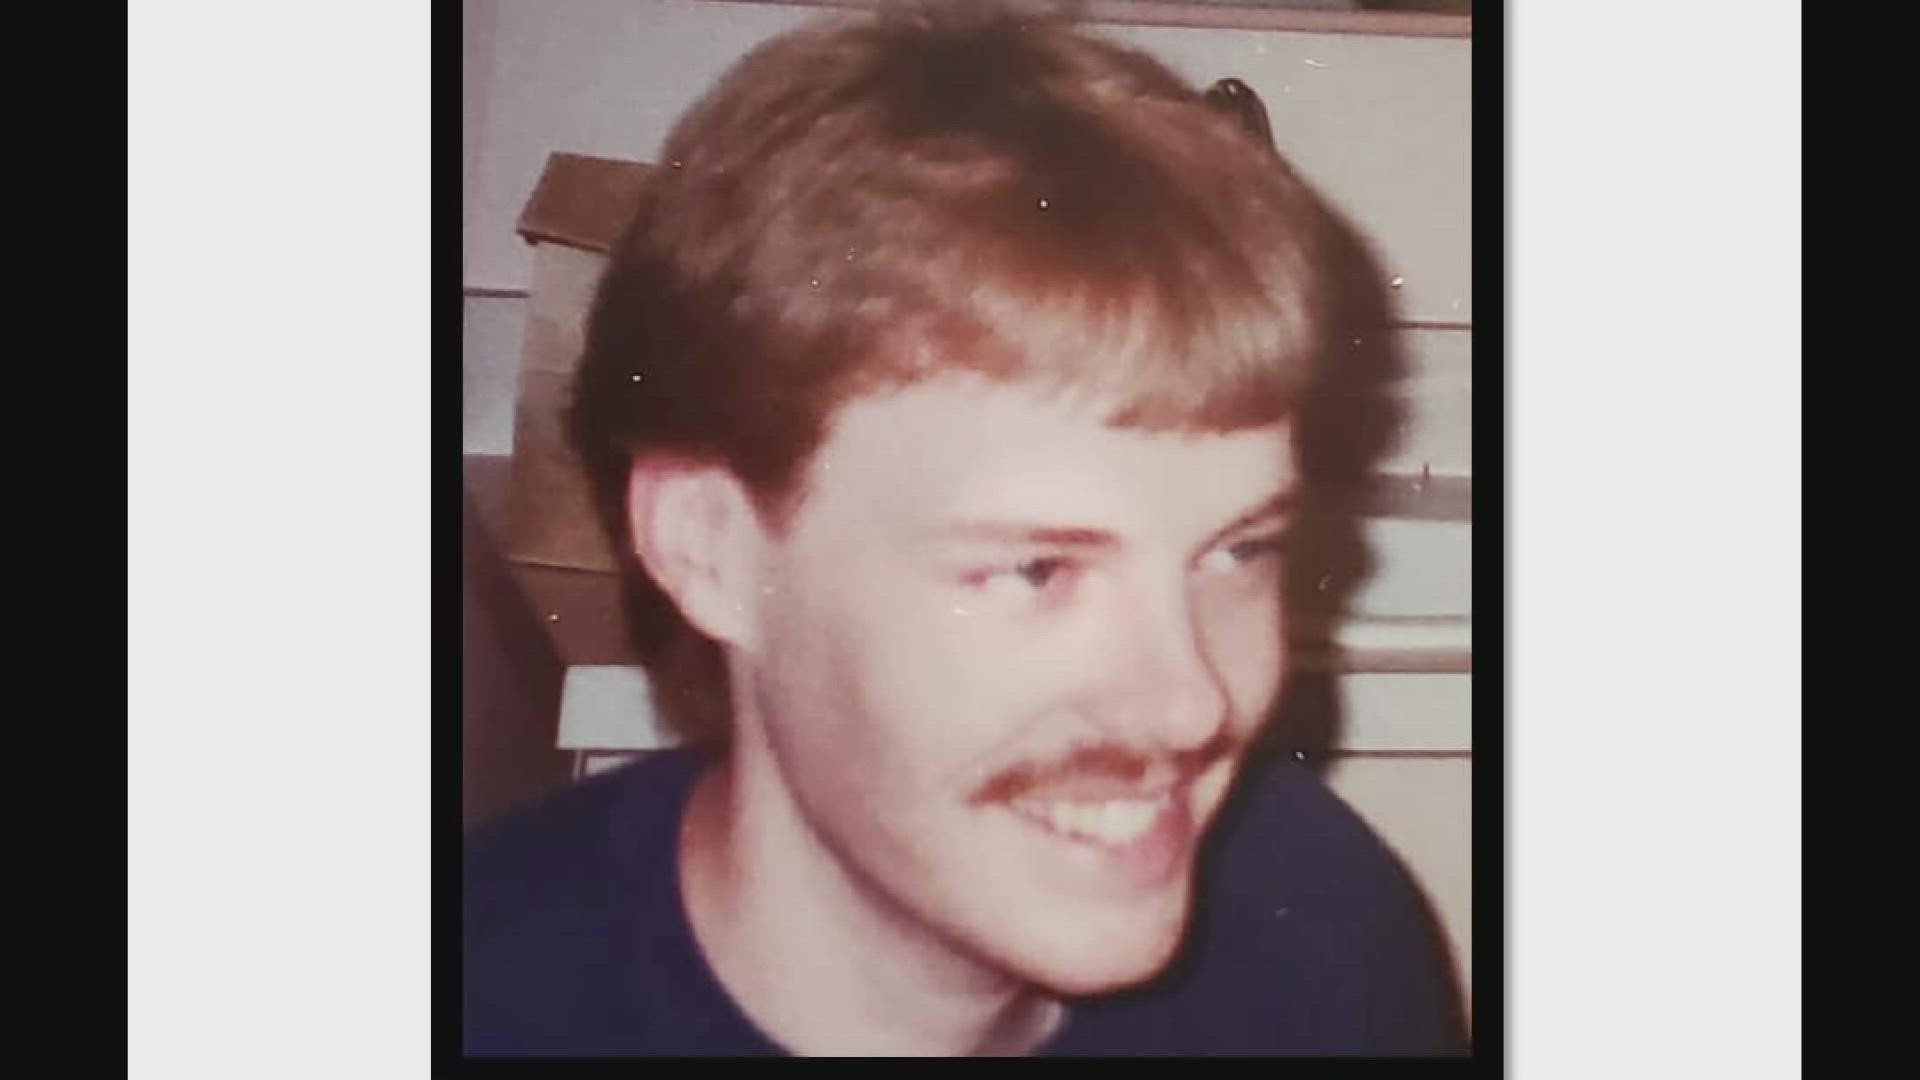 Remains of Bothell man identified more than 2 decades after he went missing